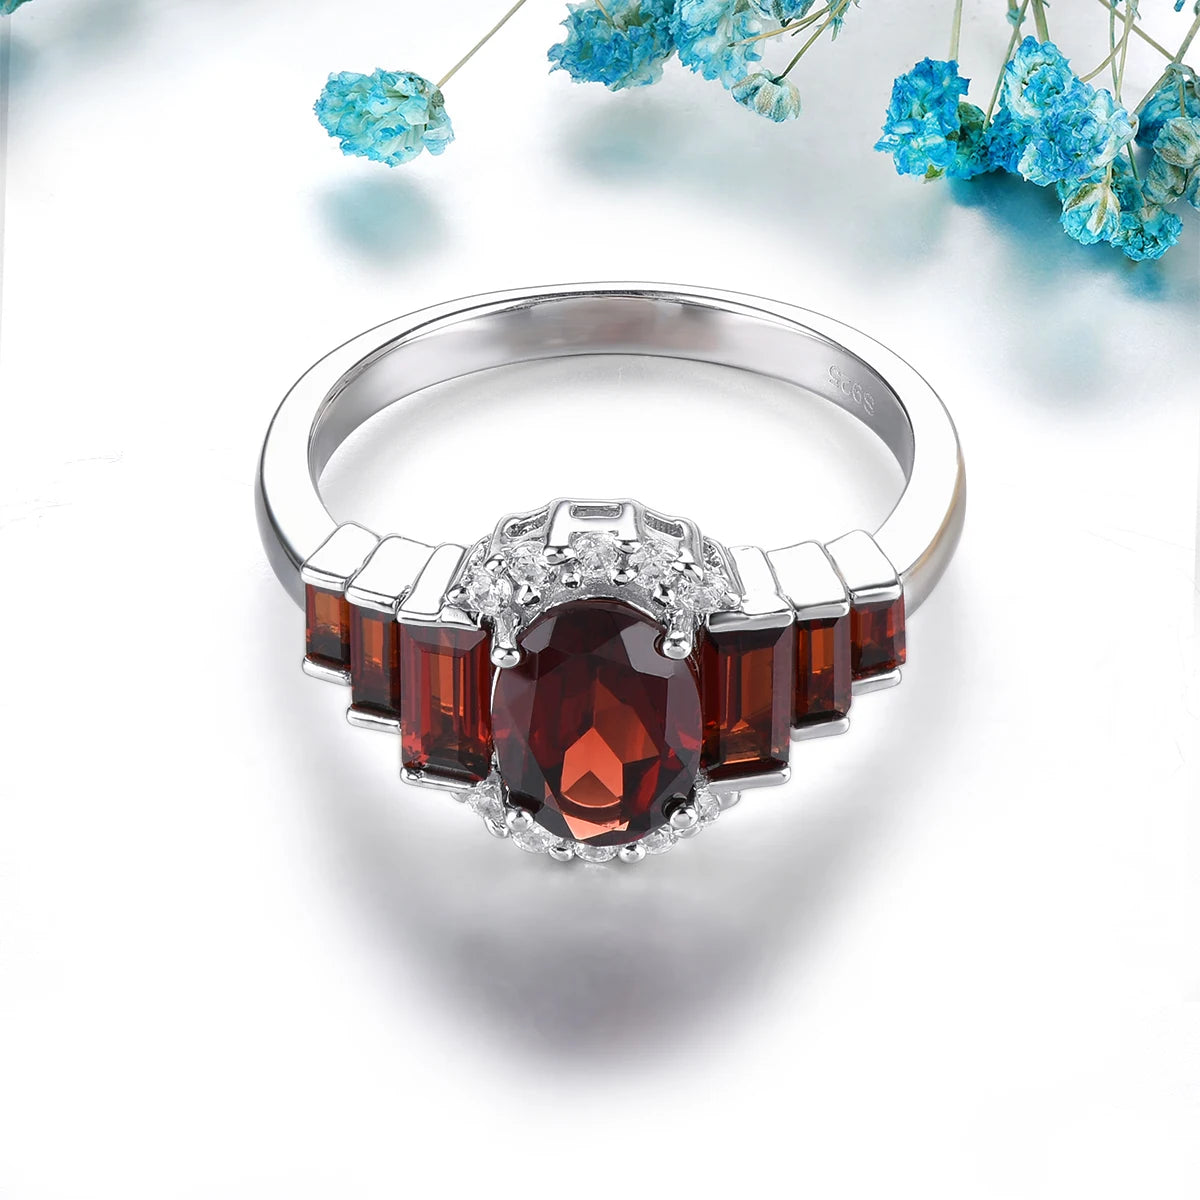 Natural Red Garnet Sterling Silver Rings 2.3 Carats Genuine January Birthstone Women Elegant Classic Style S925 Fine Jewelrys